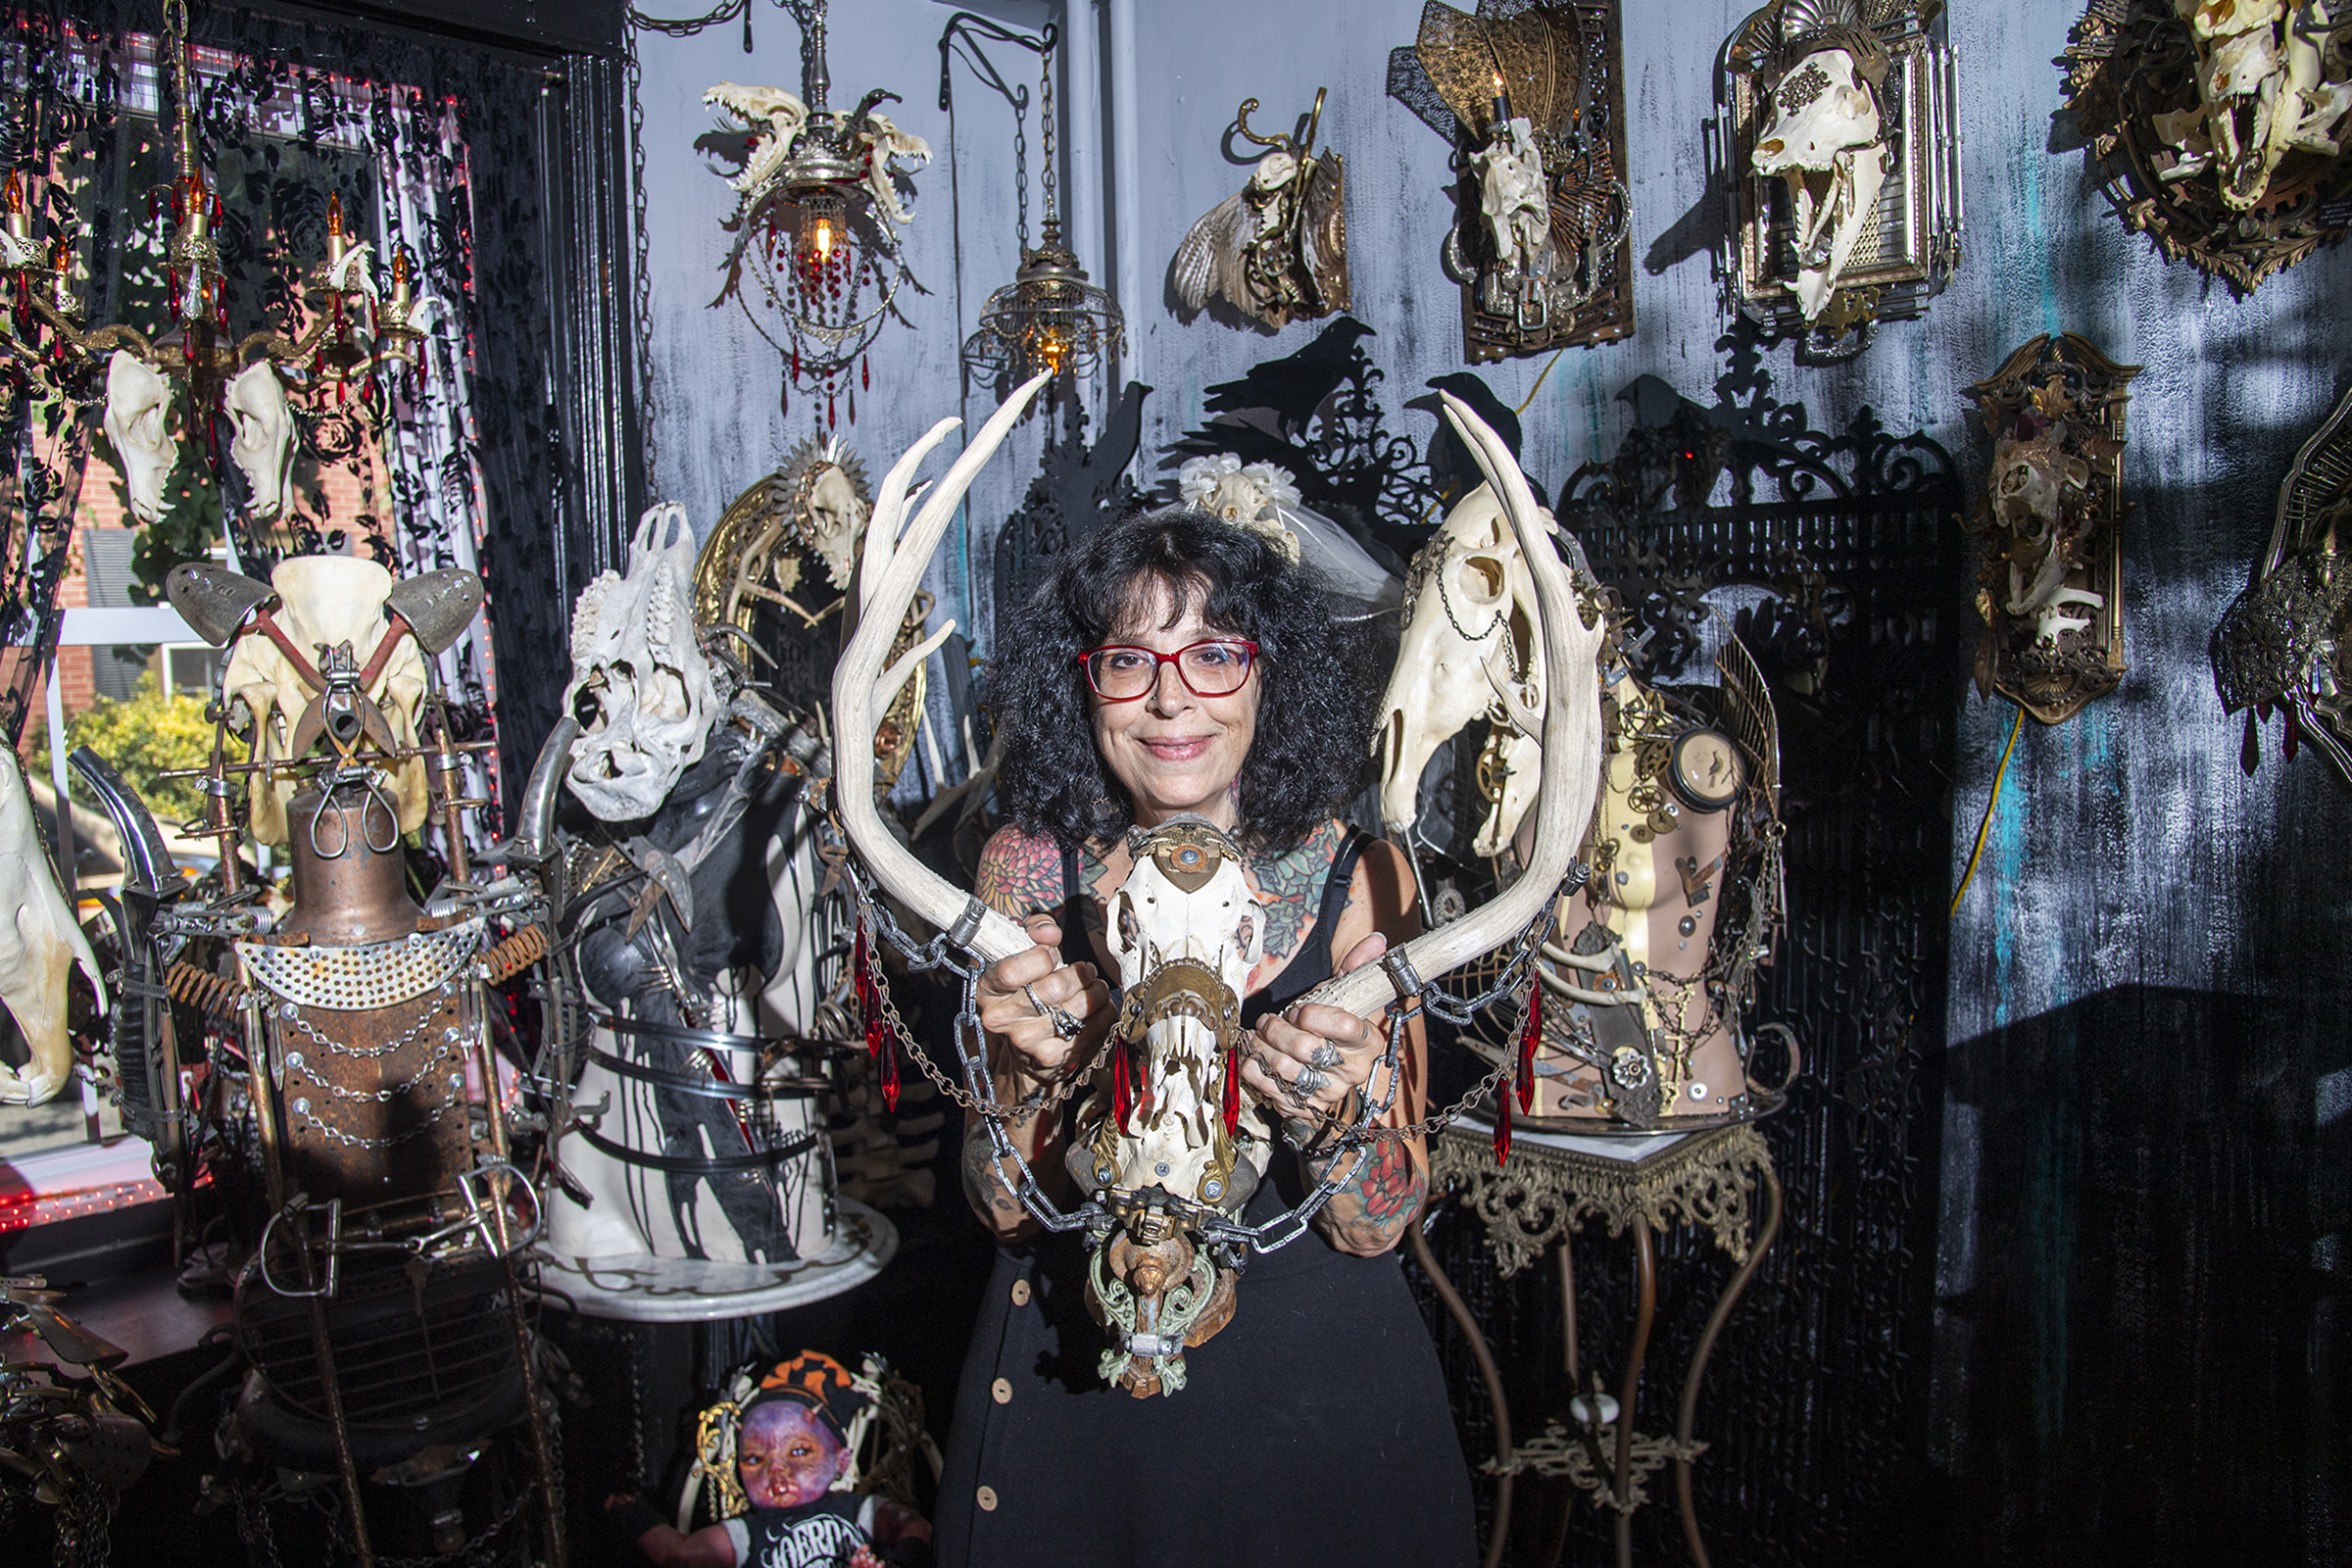 Skull artist Sue Moerder crafts craniums into art and shes created the Artists of Philly Pop-Up Co-Op